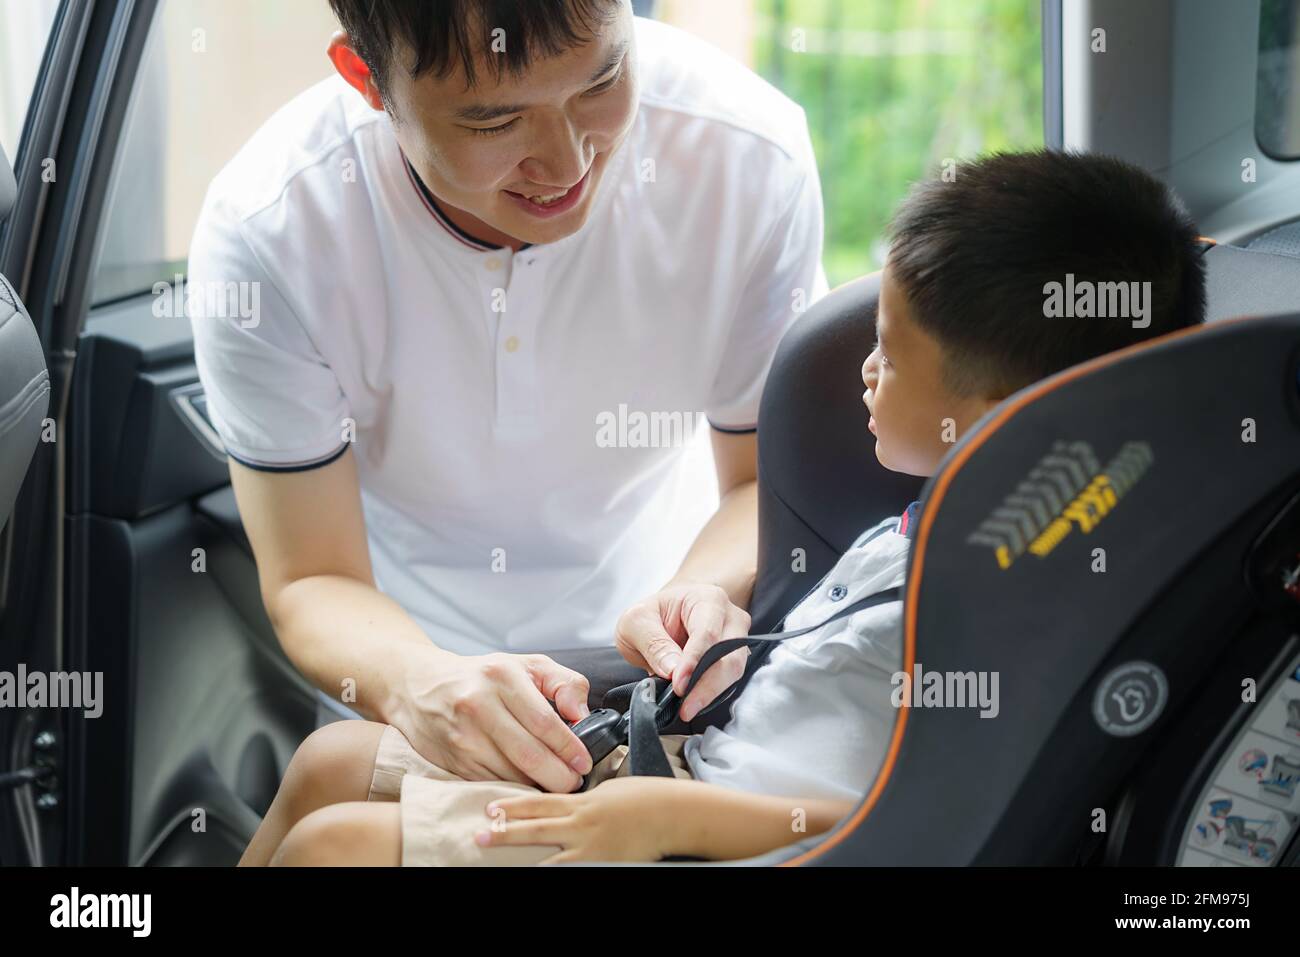 Asian father clicking child into car seat while traveling, fathers interact with their children throughout the day. Stock Photo